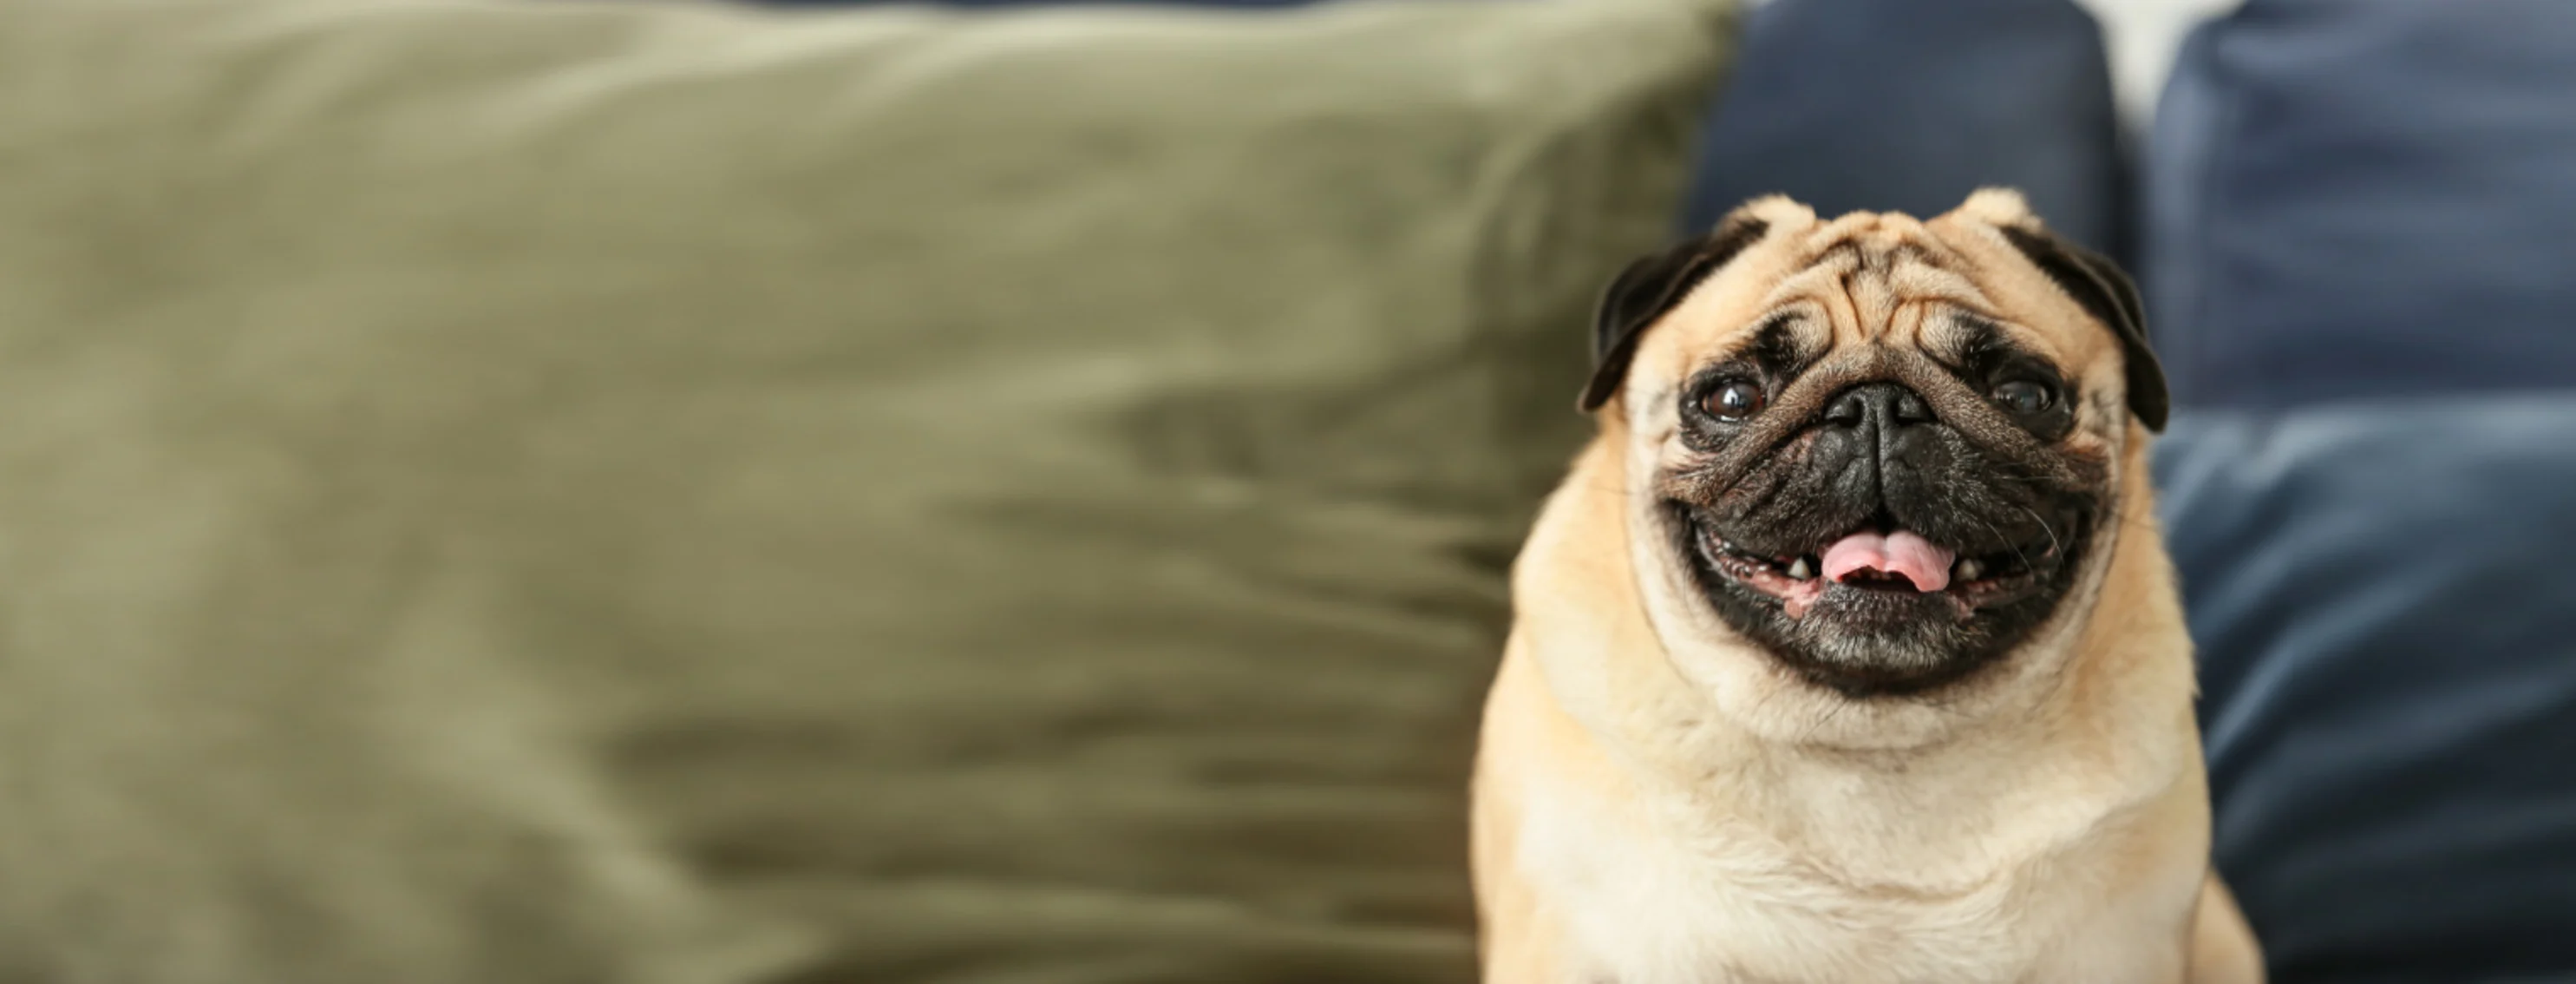 A pug sitting on a blue couch with green pillows